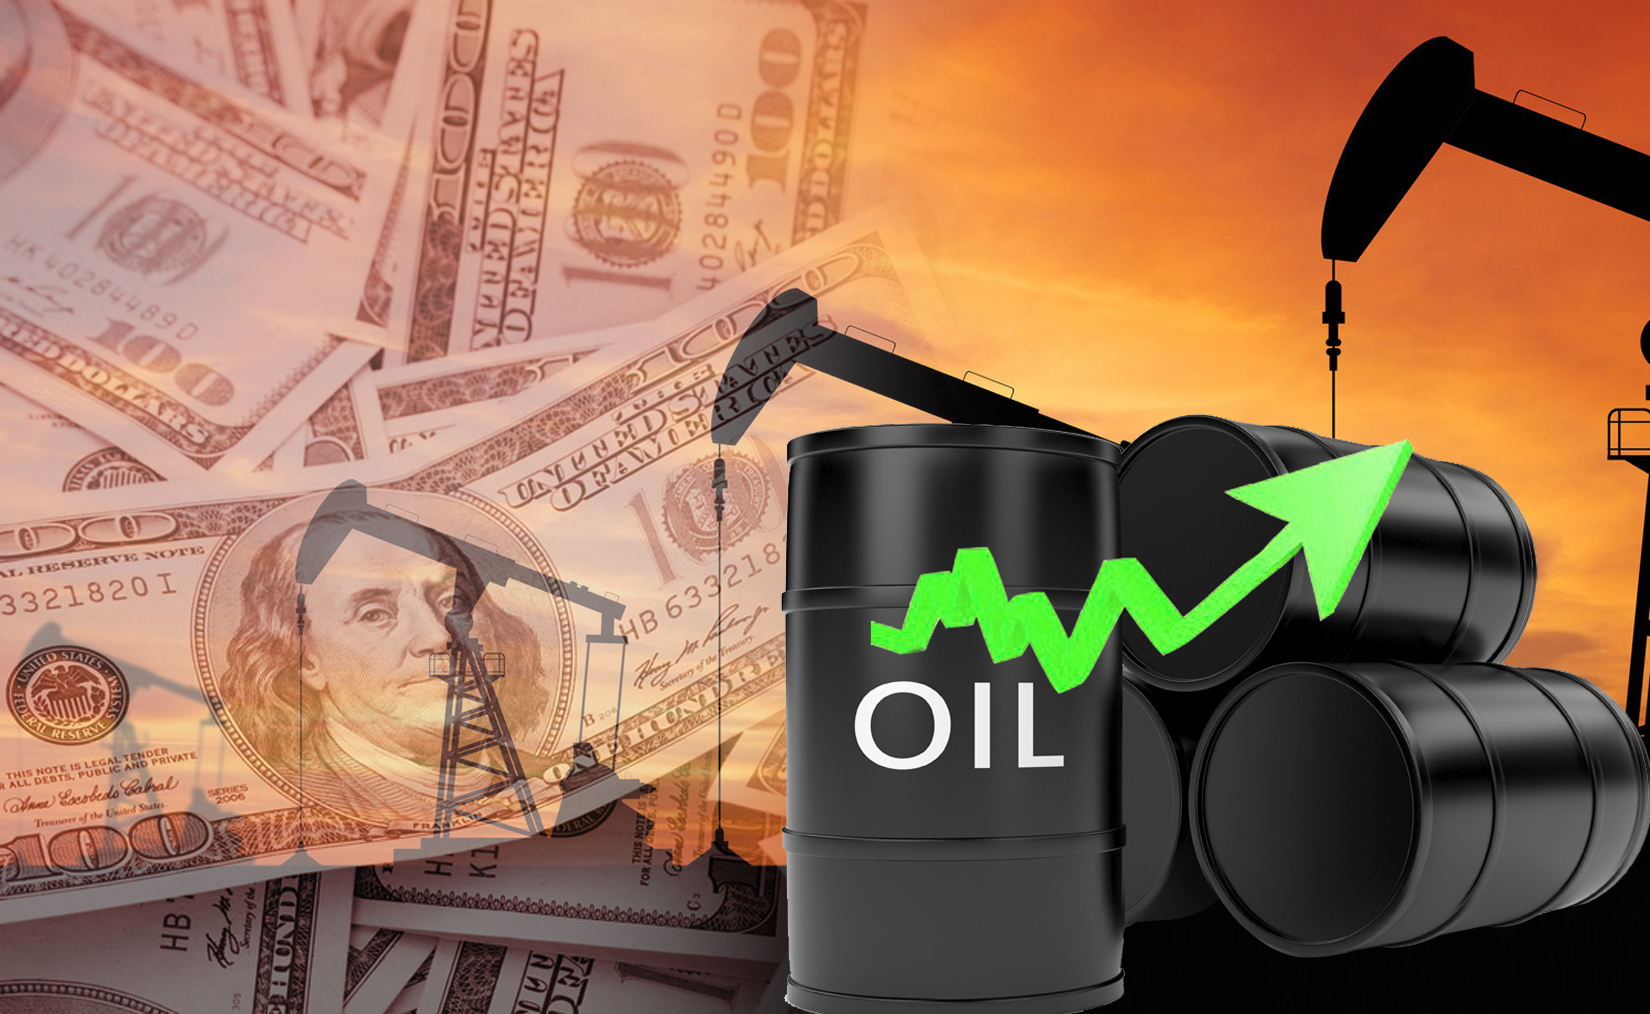 Kuwait oil price up 93 cents to USD 39.87 pb                                                                                                                                                                                                              